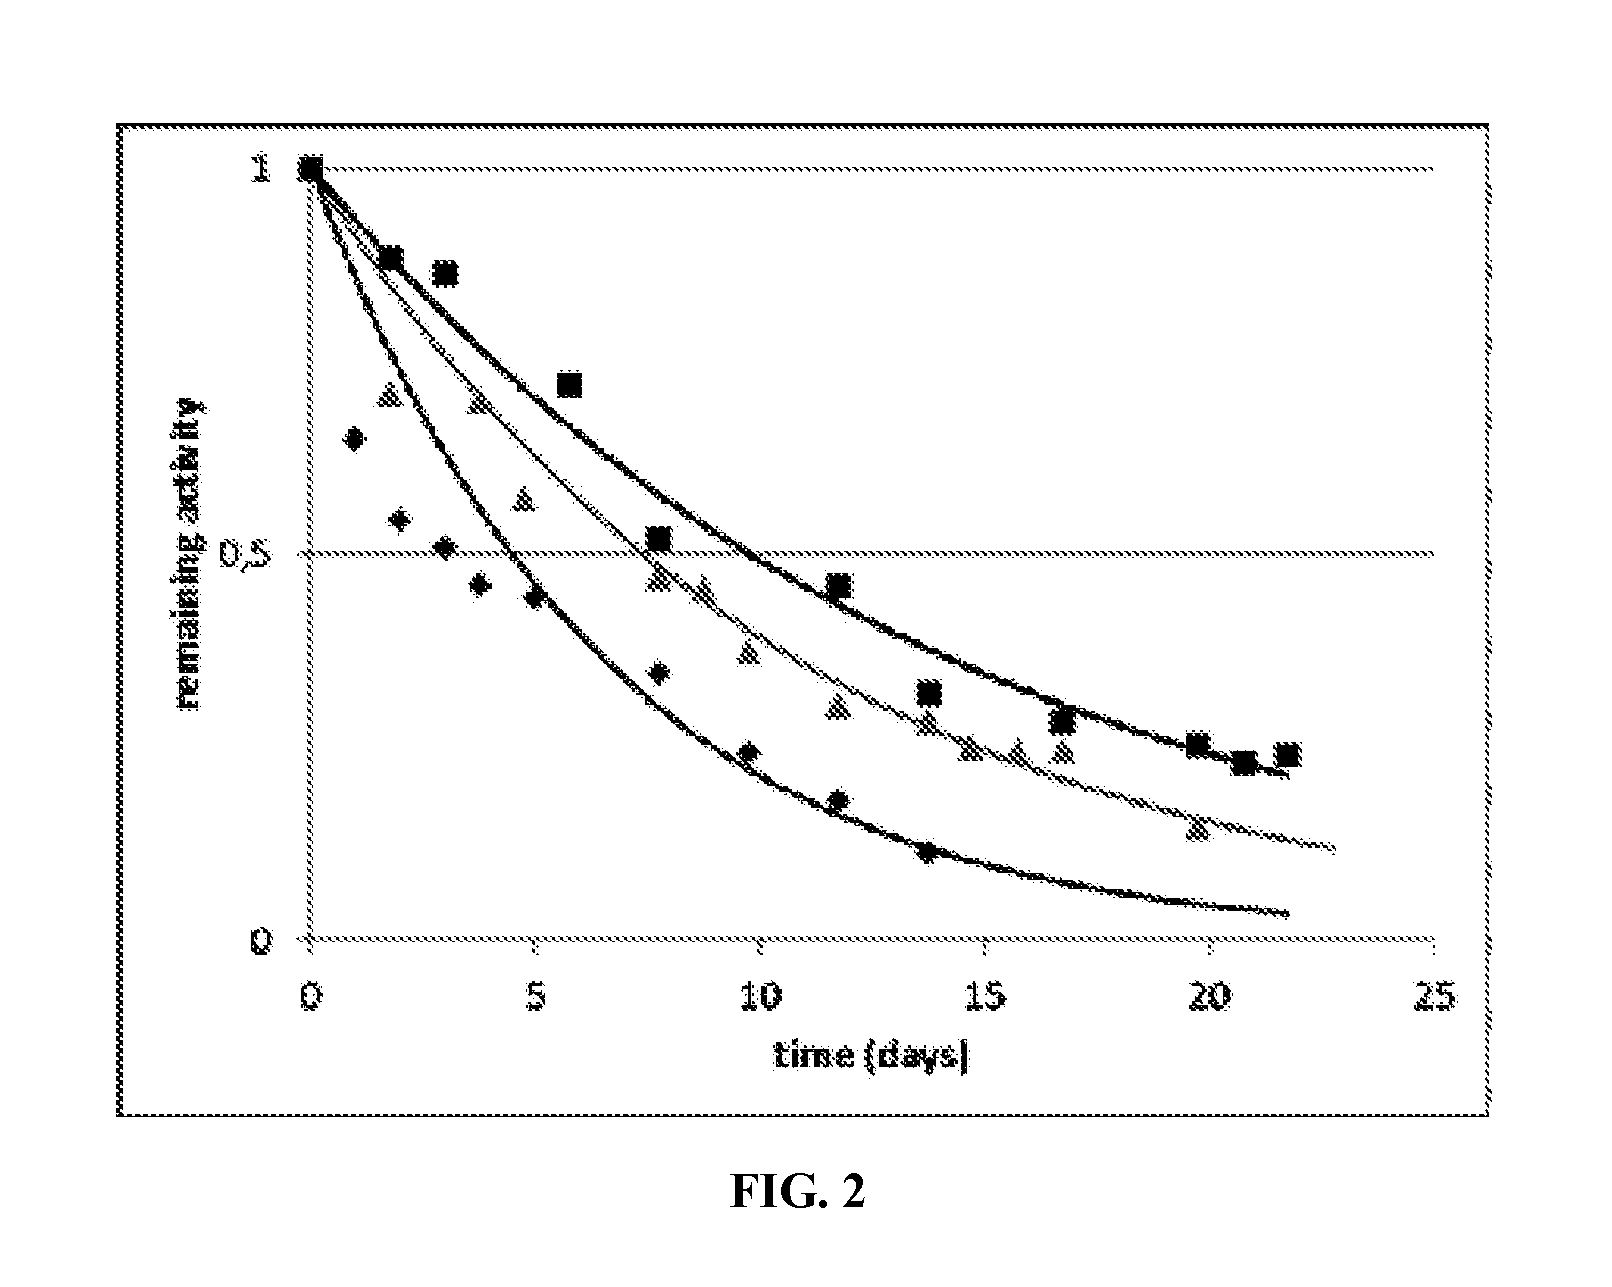 Mutant lactate oxidase with increased stability and product, methods and uses involving the same